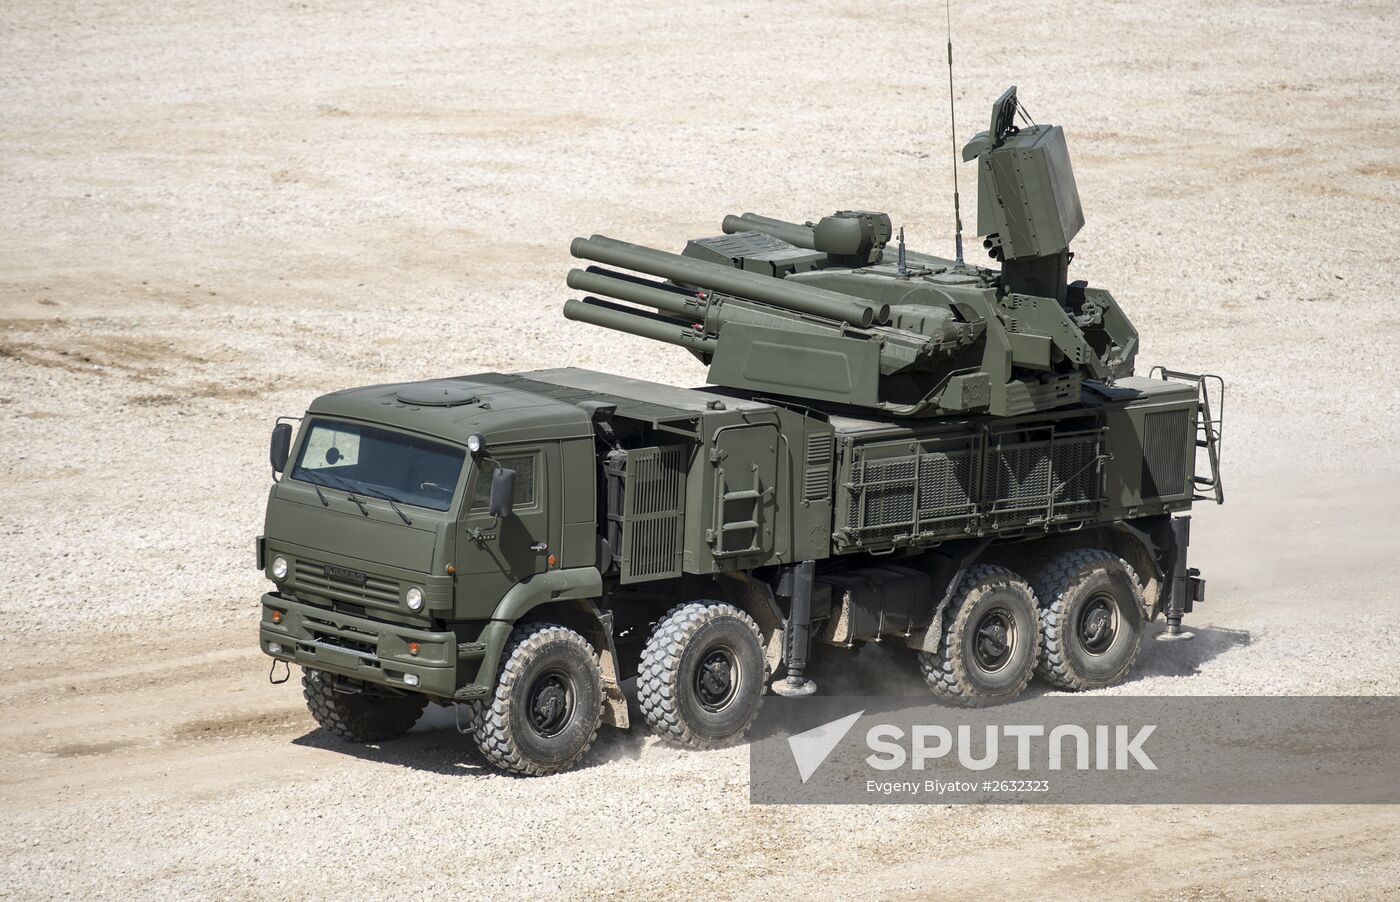 Military equipment displayed in the run-up to Army-2015 international forum